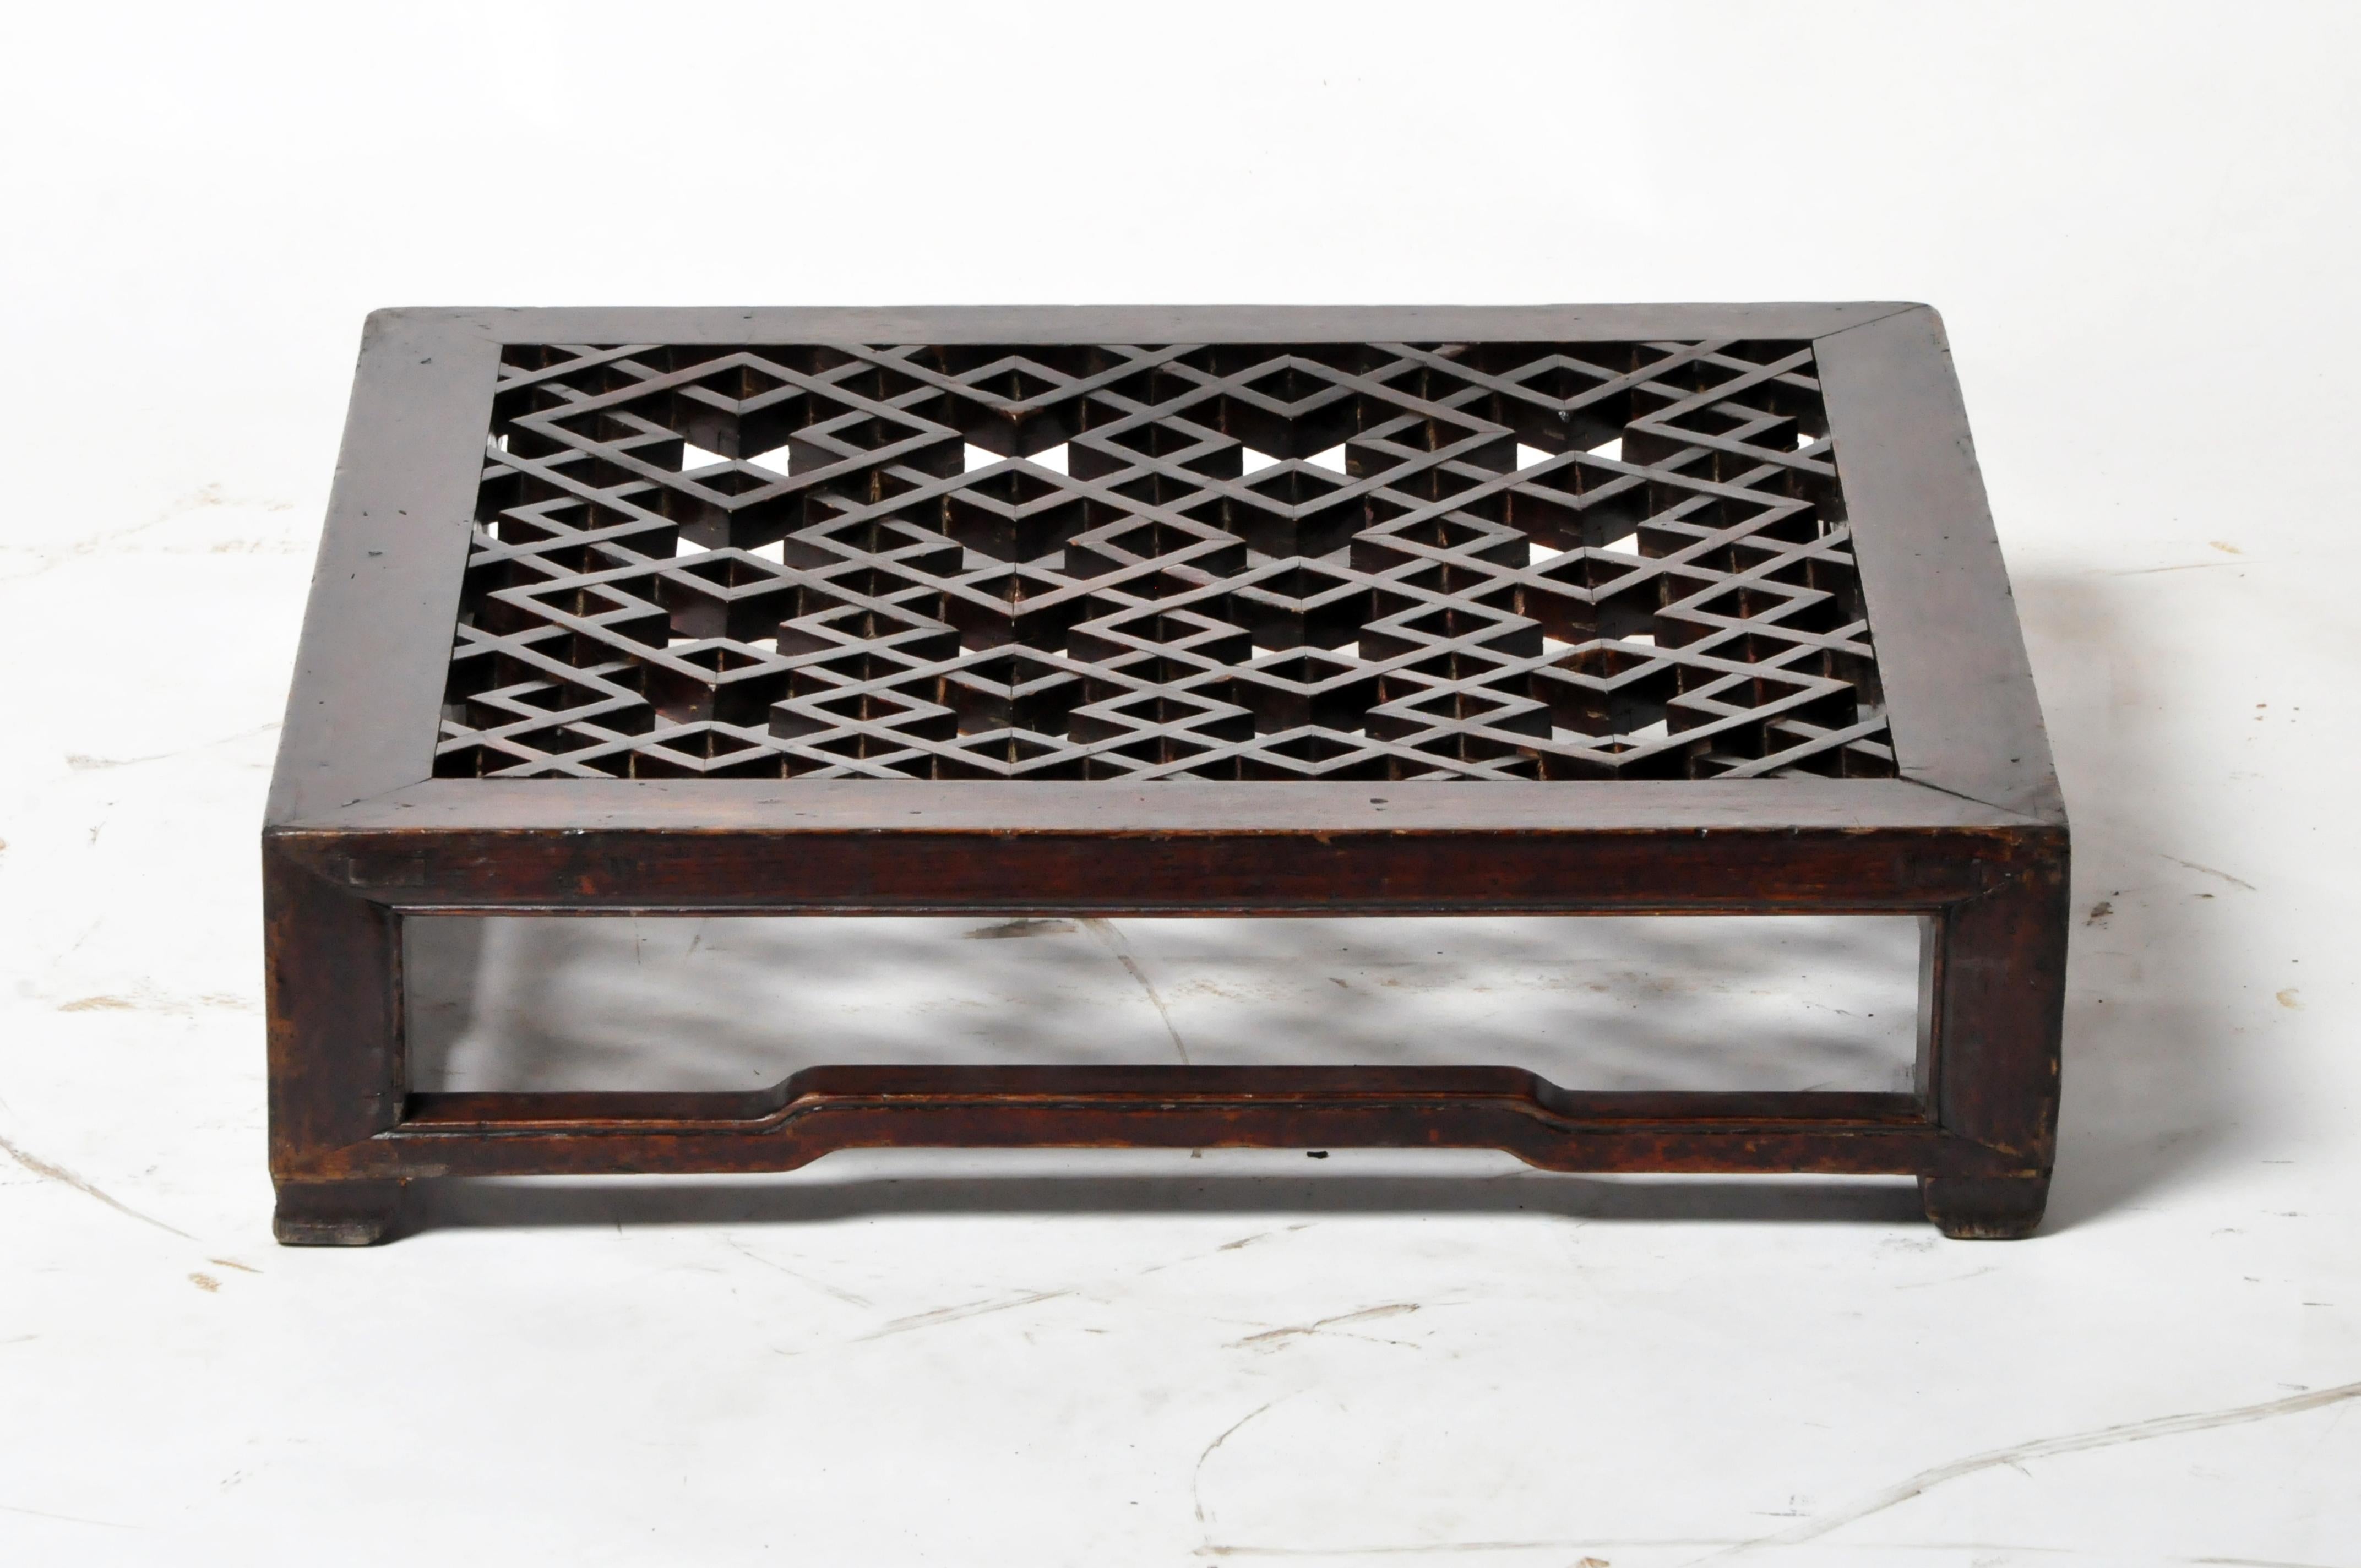 This low latticed footstool was placed in front of a chair to keep one’s feet off the cold floor. It is made from Elm Wood, came from Shanxi Province, and dates to the 19th Century. It features intricate, nail-less joinery and retains its original